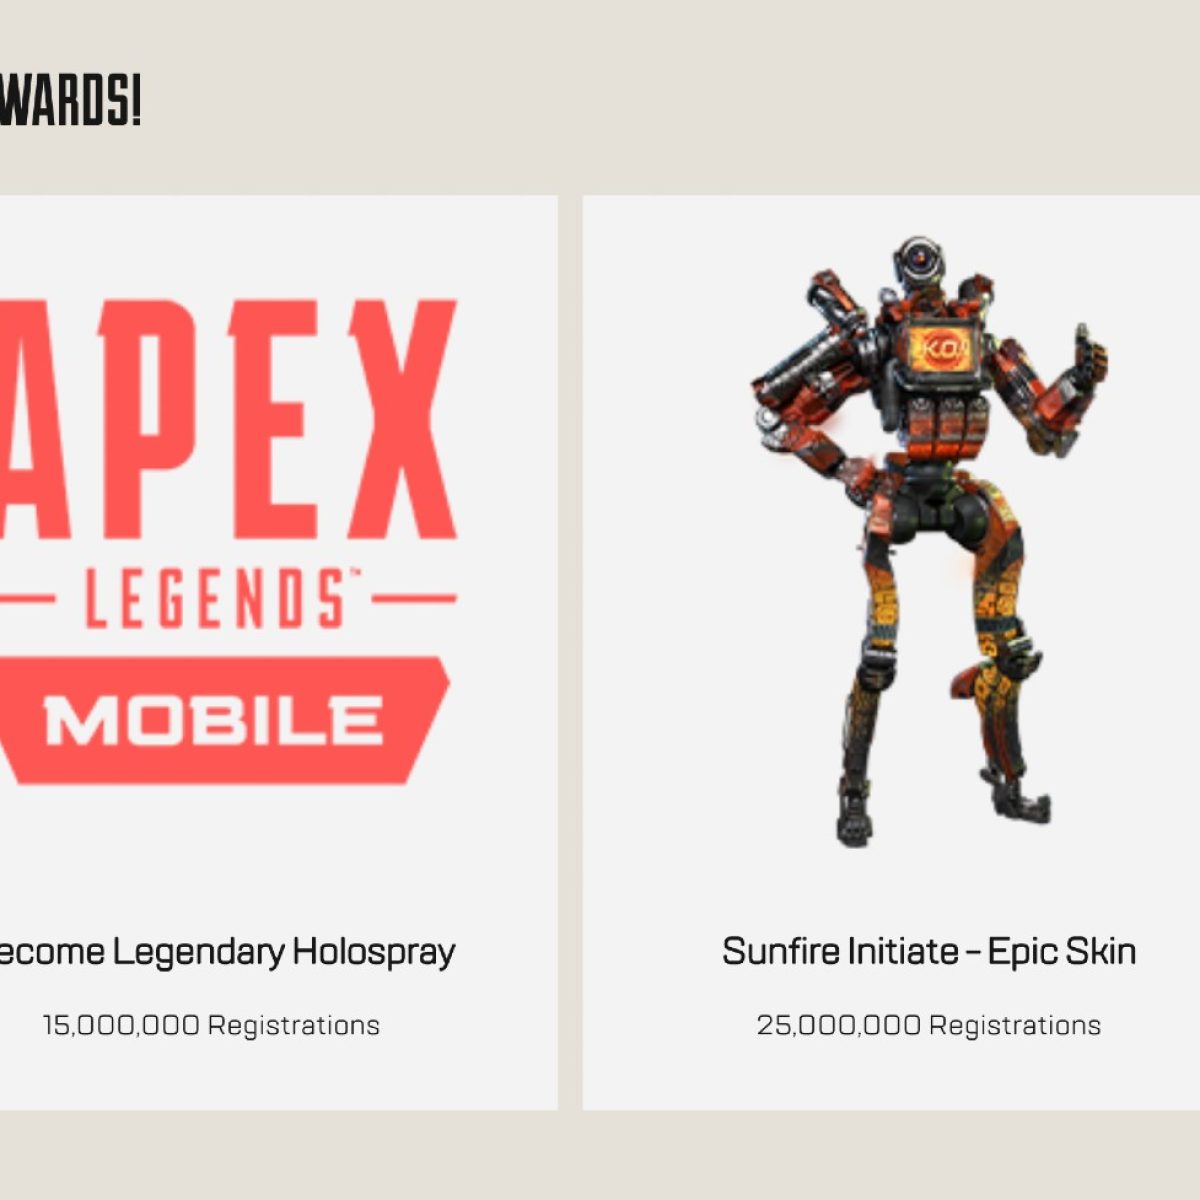 Apex Legends Mobile Now Available for Pre-registration - QooApp News